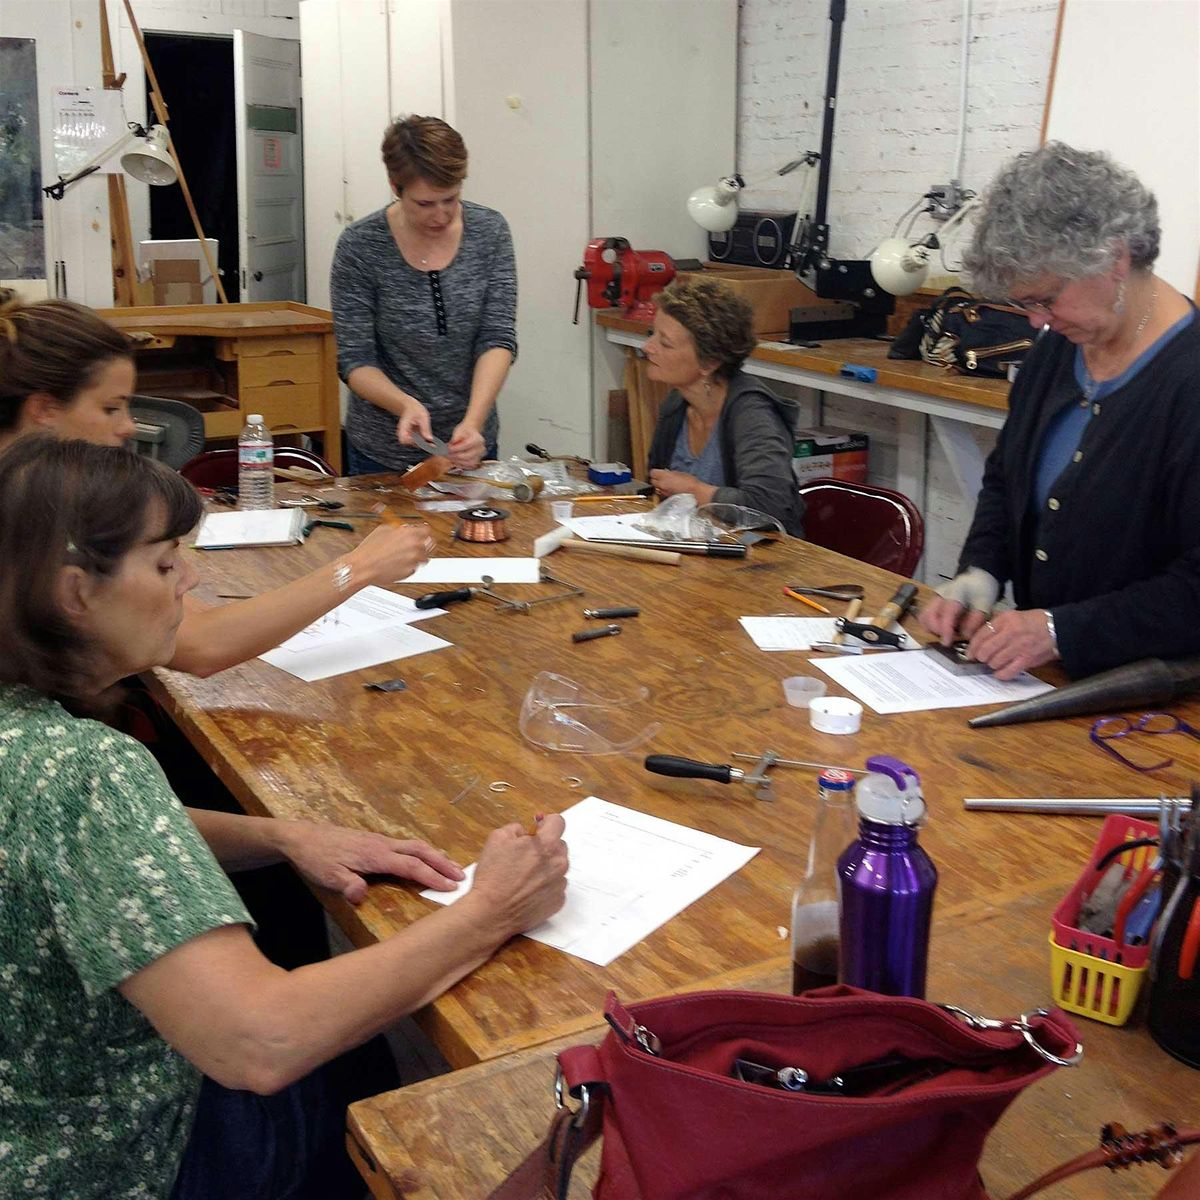 AFTERNOON SESSION: BEYOND THE BASICS JEWELRY CLASS